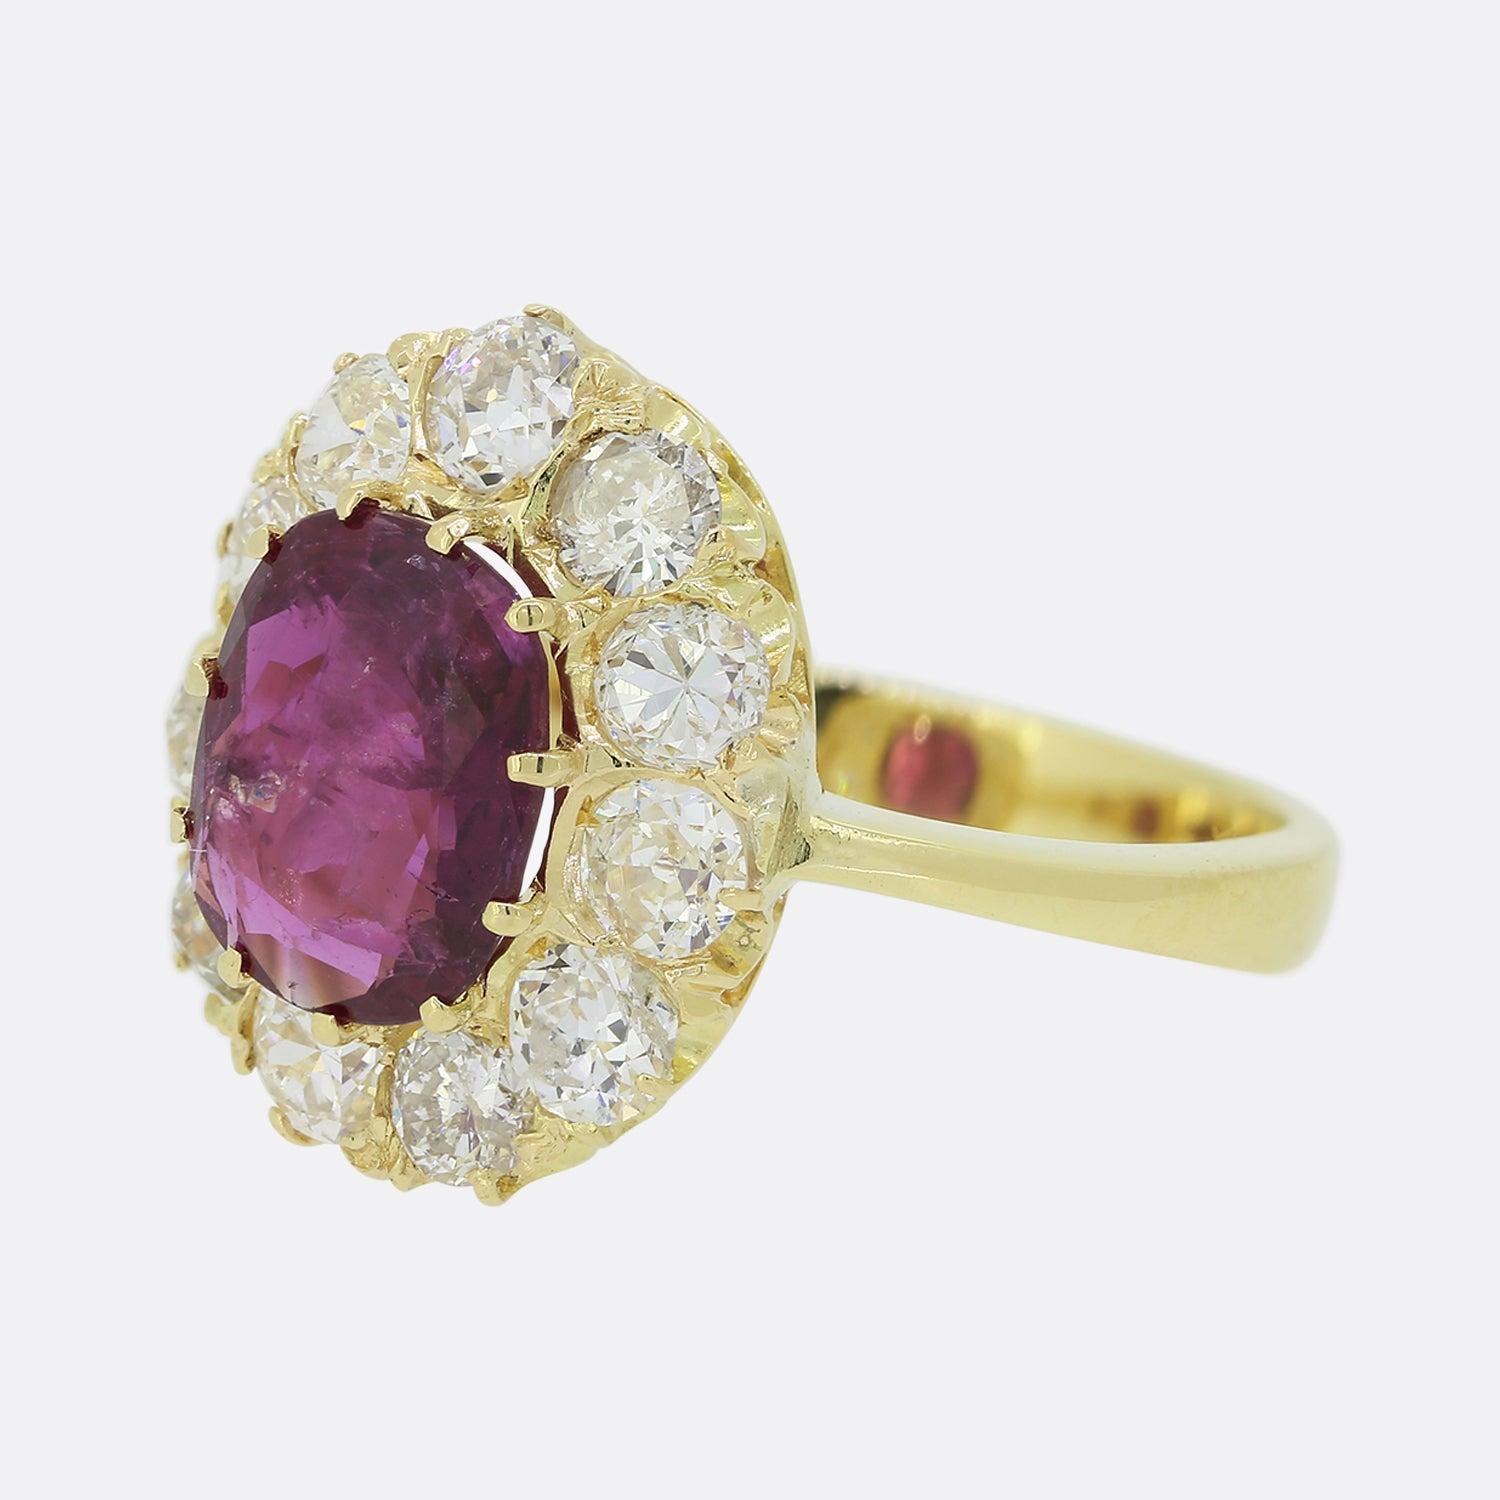 This is an 18ct yellow gold ruby and diamond cluster ring. The ring features a central oval cushion cut ruby surrounded by eleven old cut diamonds. The diamonds feature a bright white sparkle which highly compliments the dark red tone of the ruby.